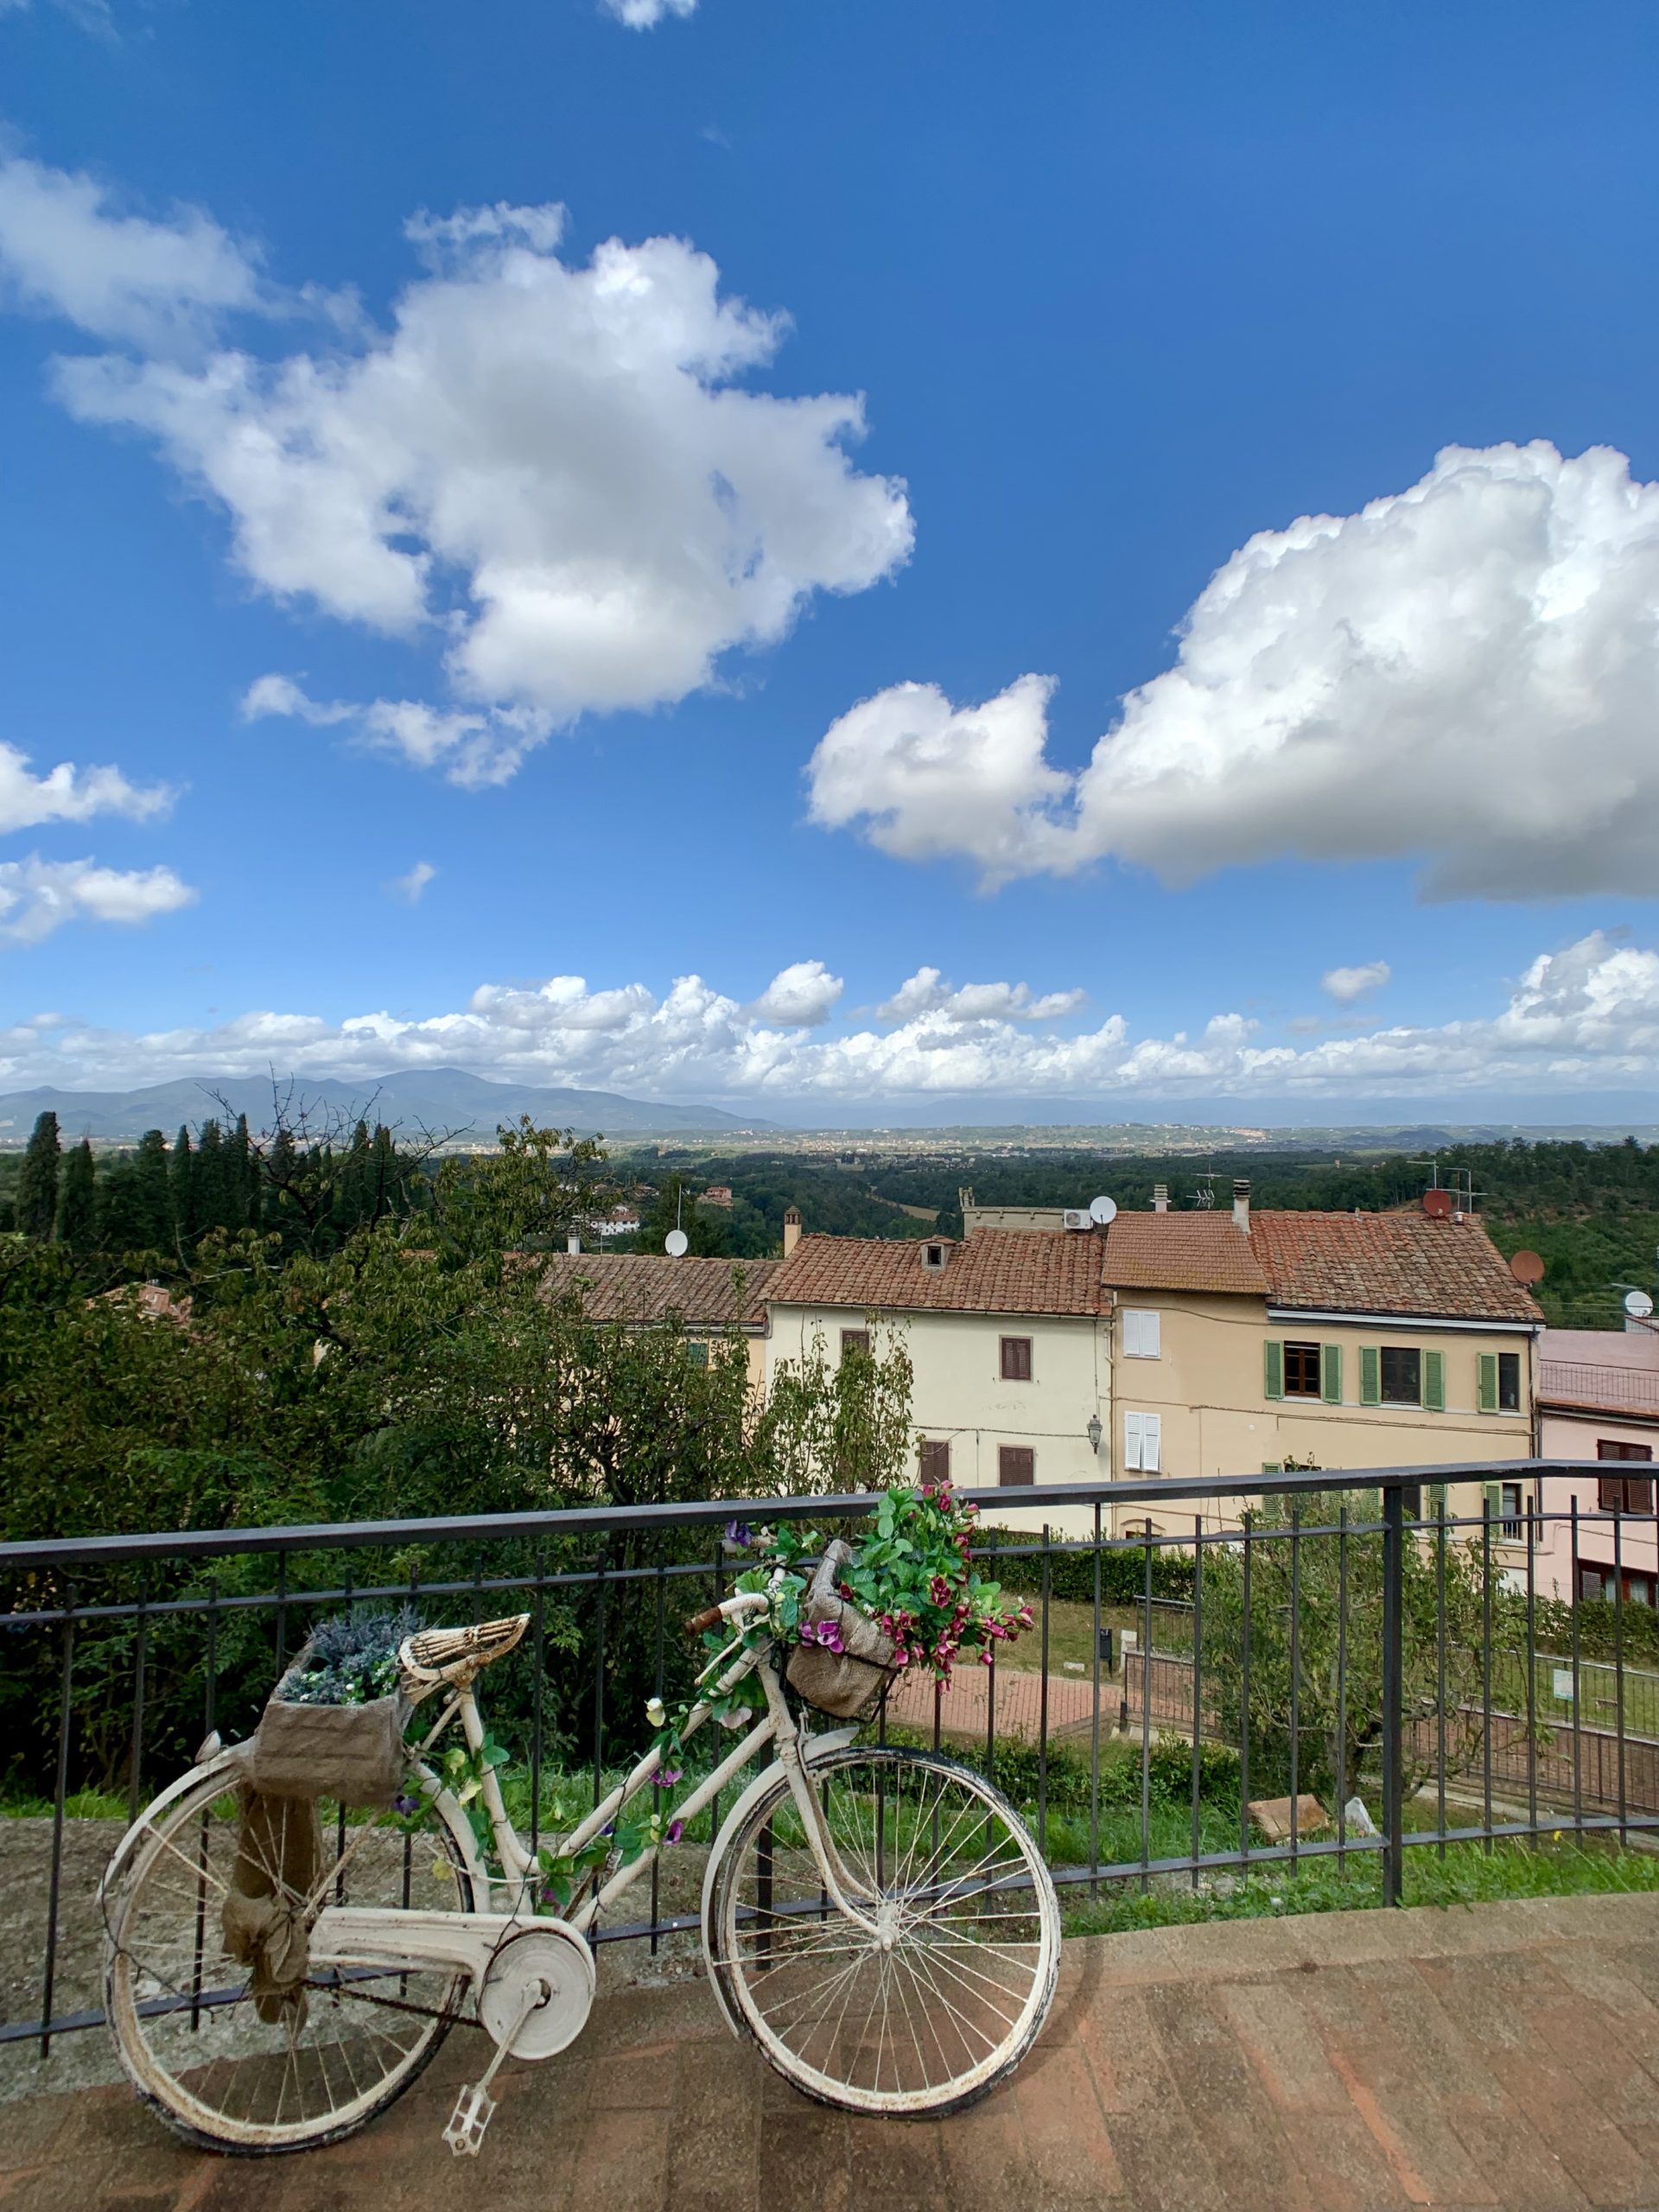 Behind Parrocchia di Santa Lucia, overlooking the Tuscan valley, Italy